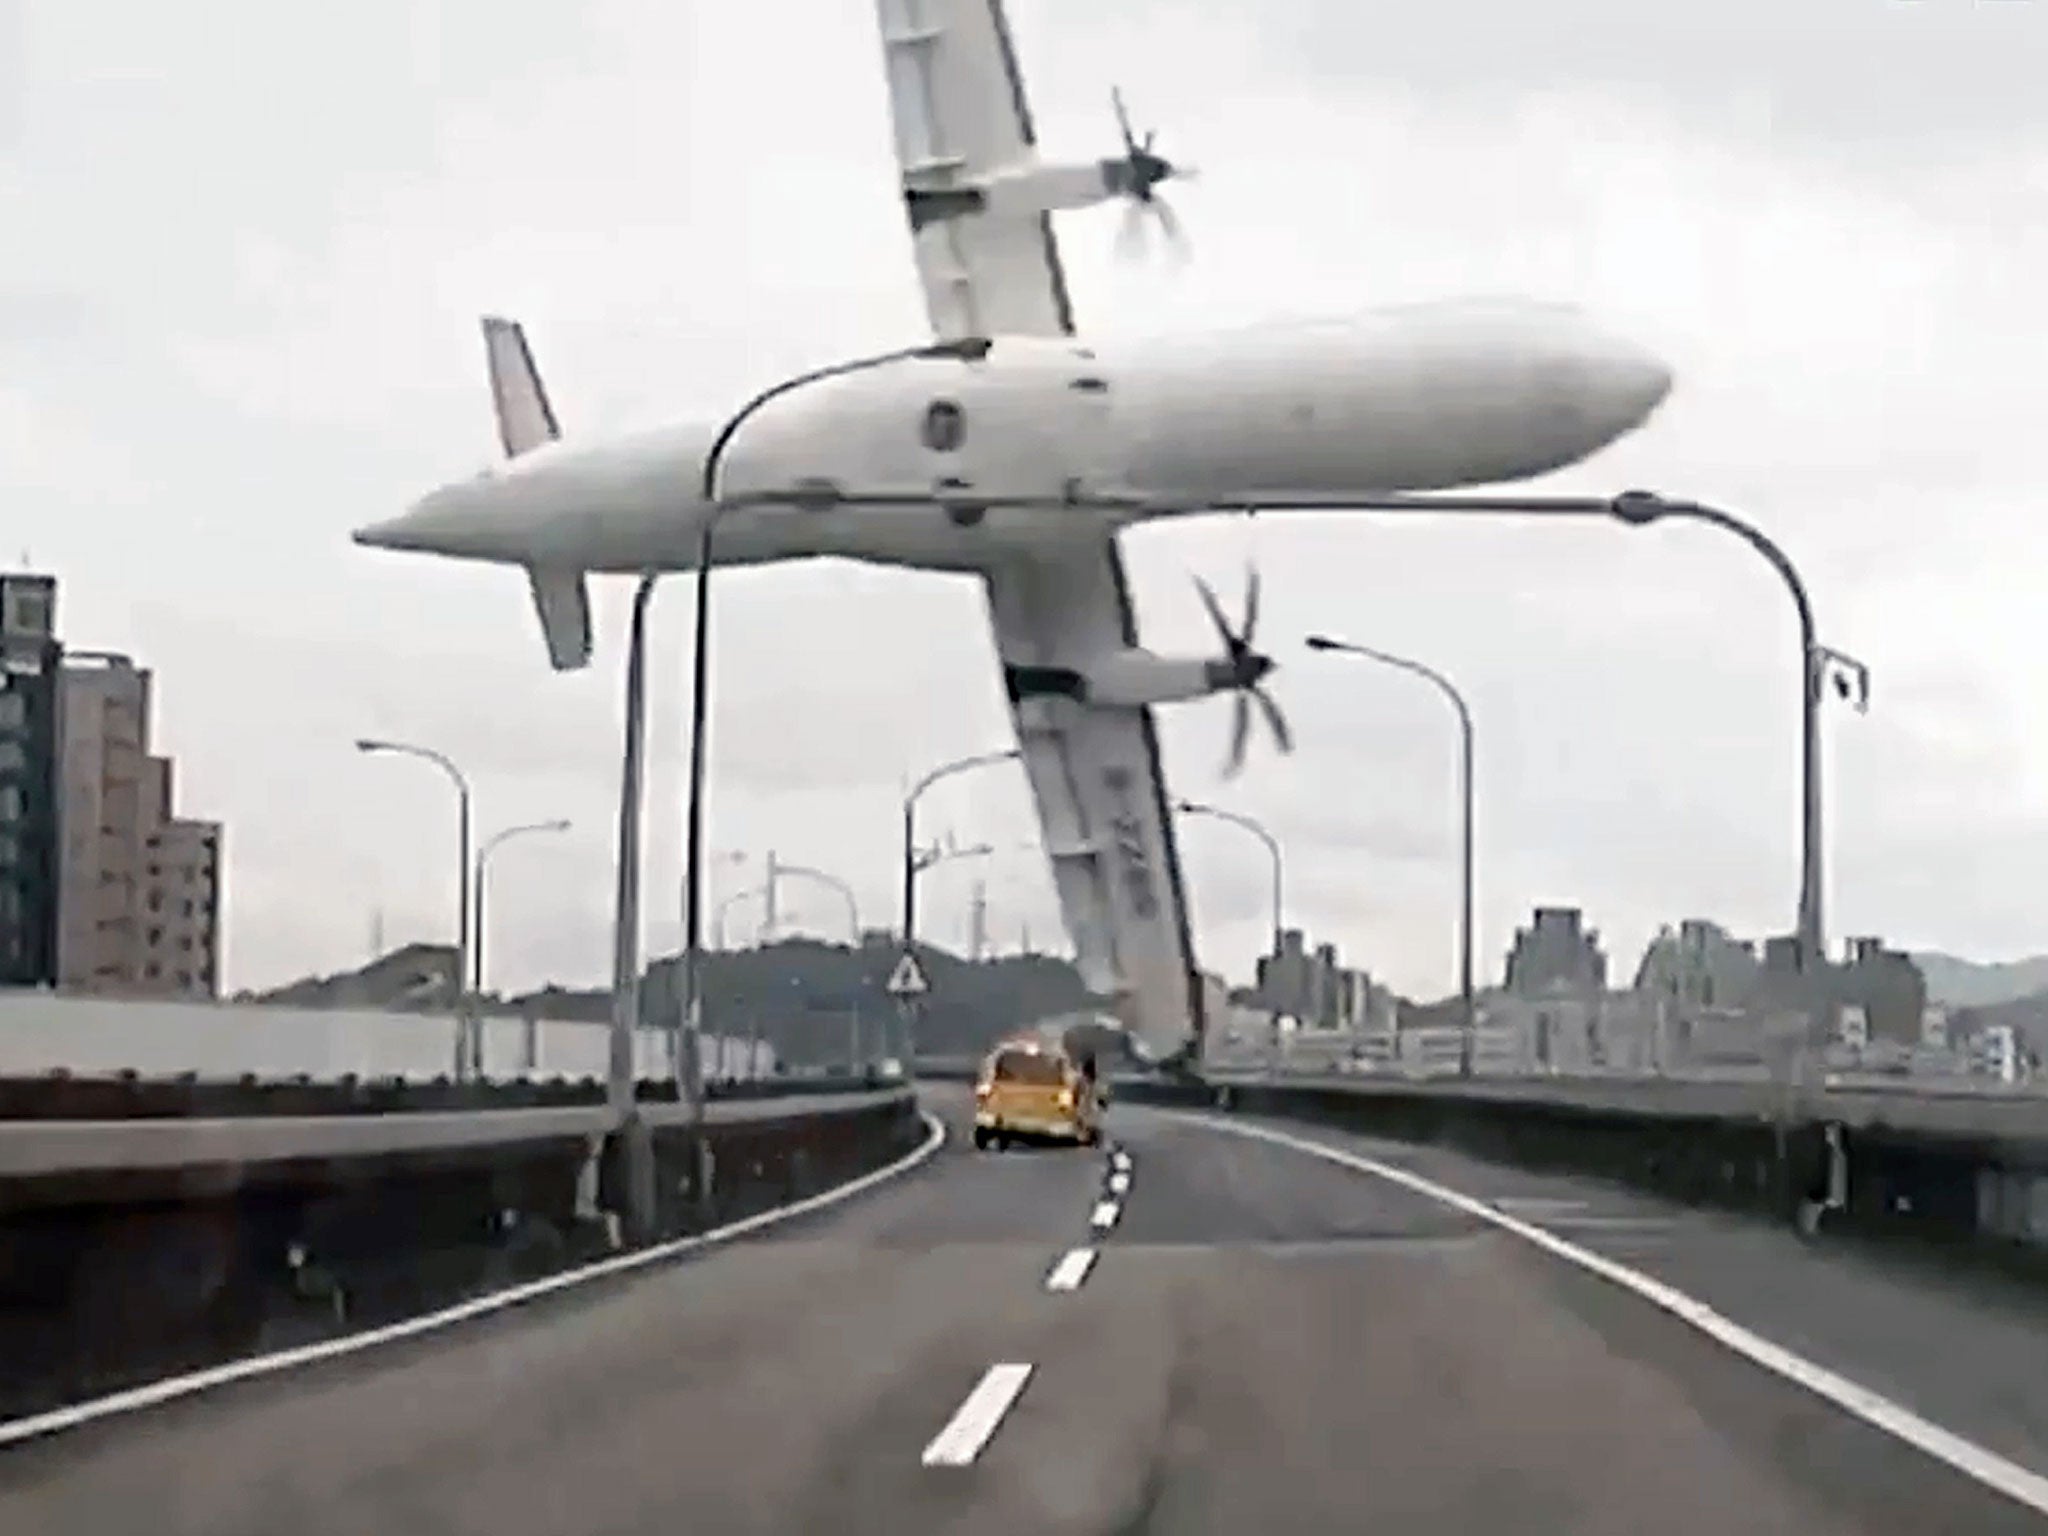 A TransAsia ATR 72-600 turboprop plane clipping an elevated motorway and hitting a taxi before crashing into the Keelung river outside Taiwan's capital Taipei in New Taipei City